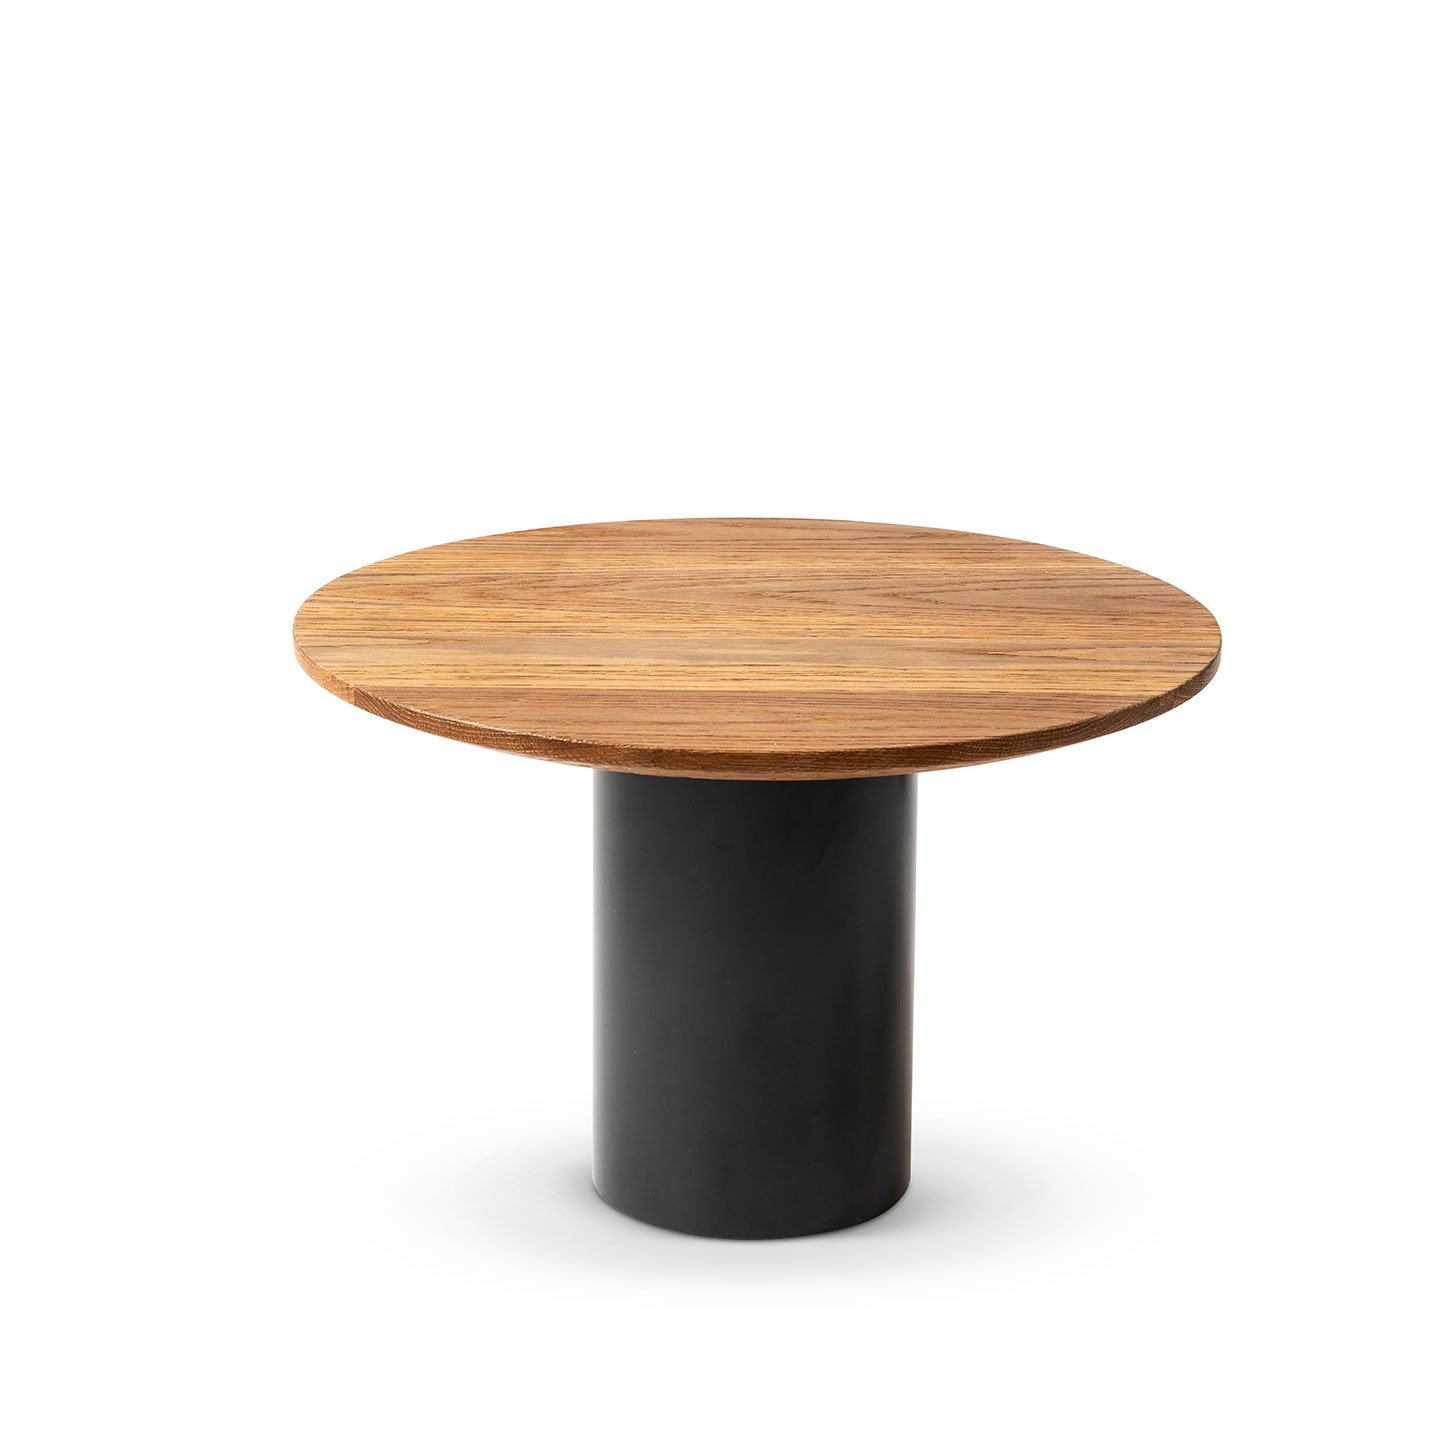 Haworth Mush Table with Cognac Stained oak with black circular base